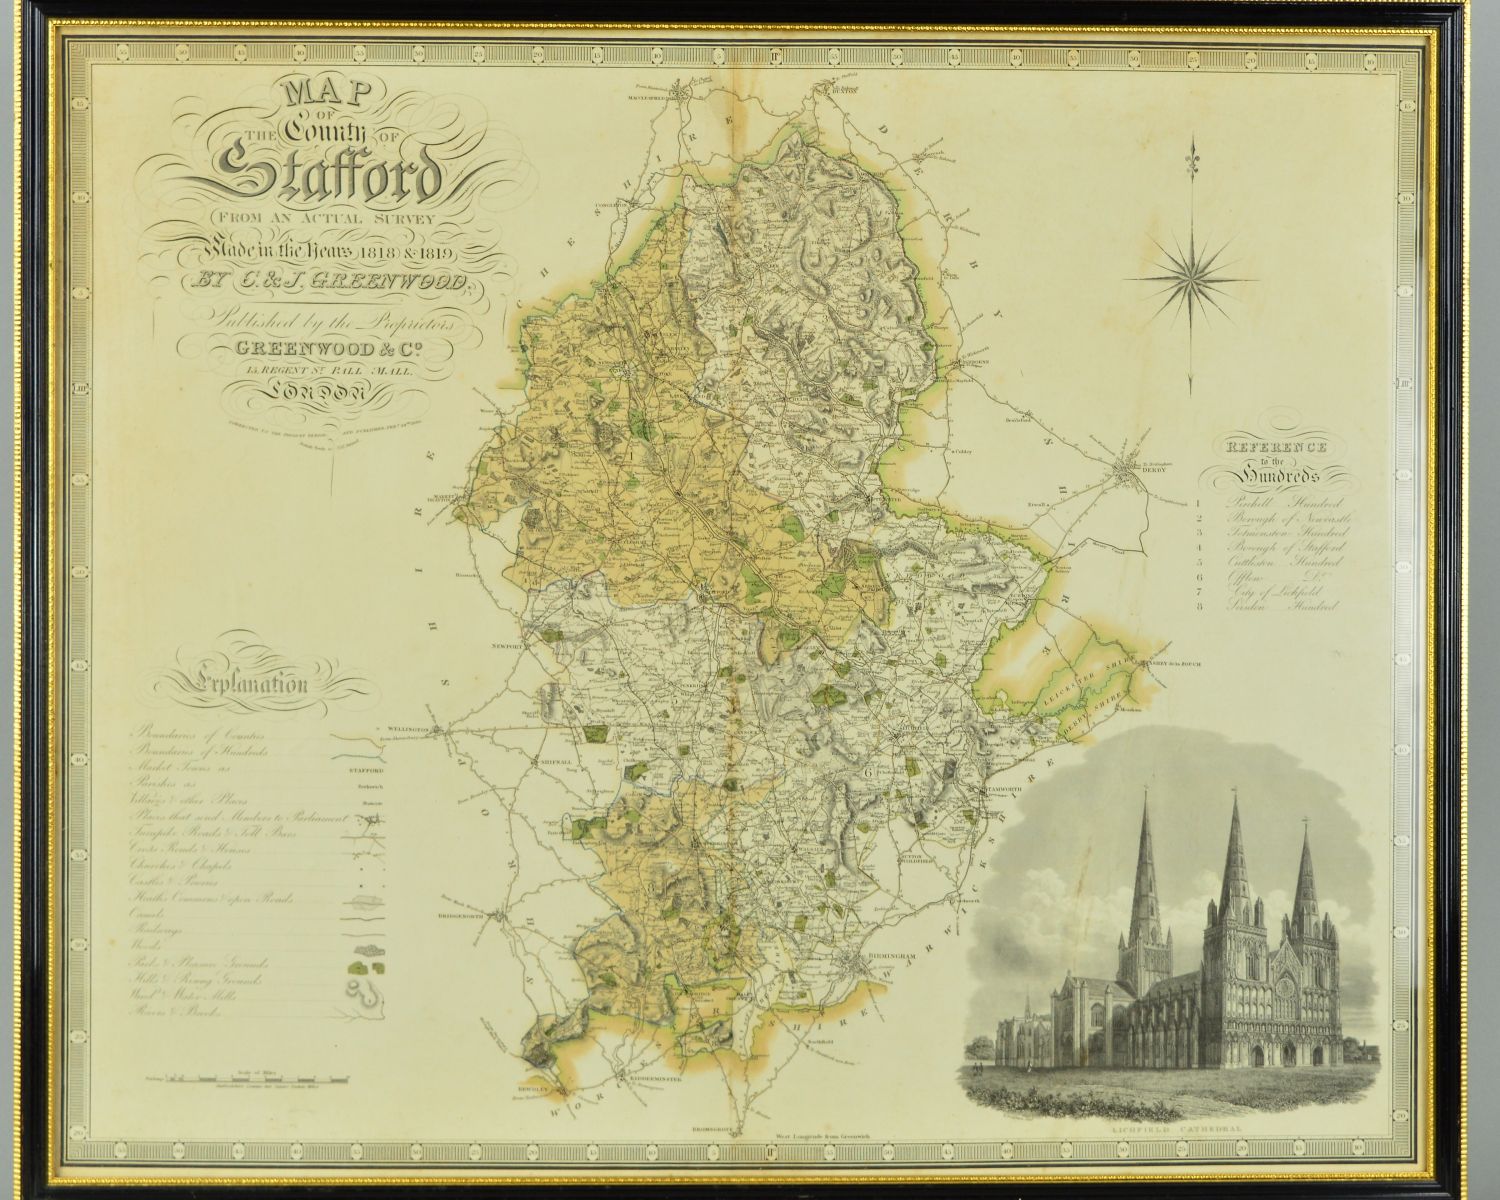 STAFFORDSHIRE, GREENWOOD (C & J), 'A Map of the County of Stafford from an Actual Survey Made in the